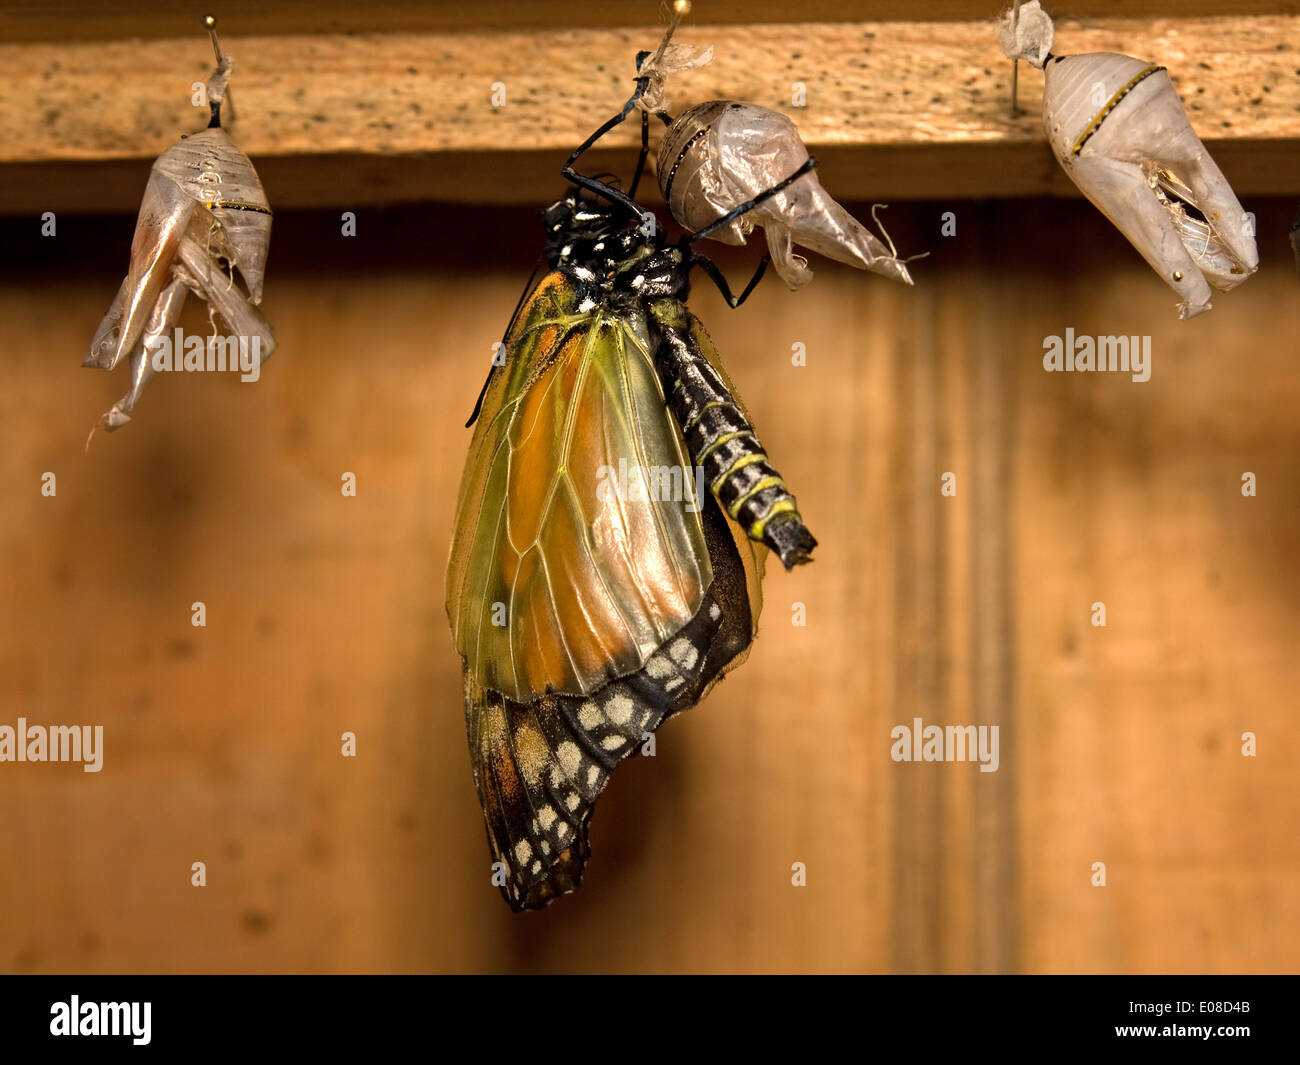 Horizontal picture of monarch butterfly, Danaus plexippus, eclosing from a chrysalis. Stock Photo